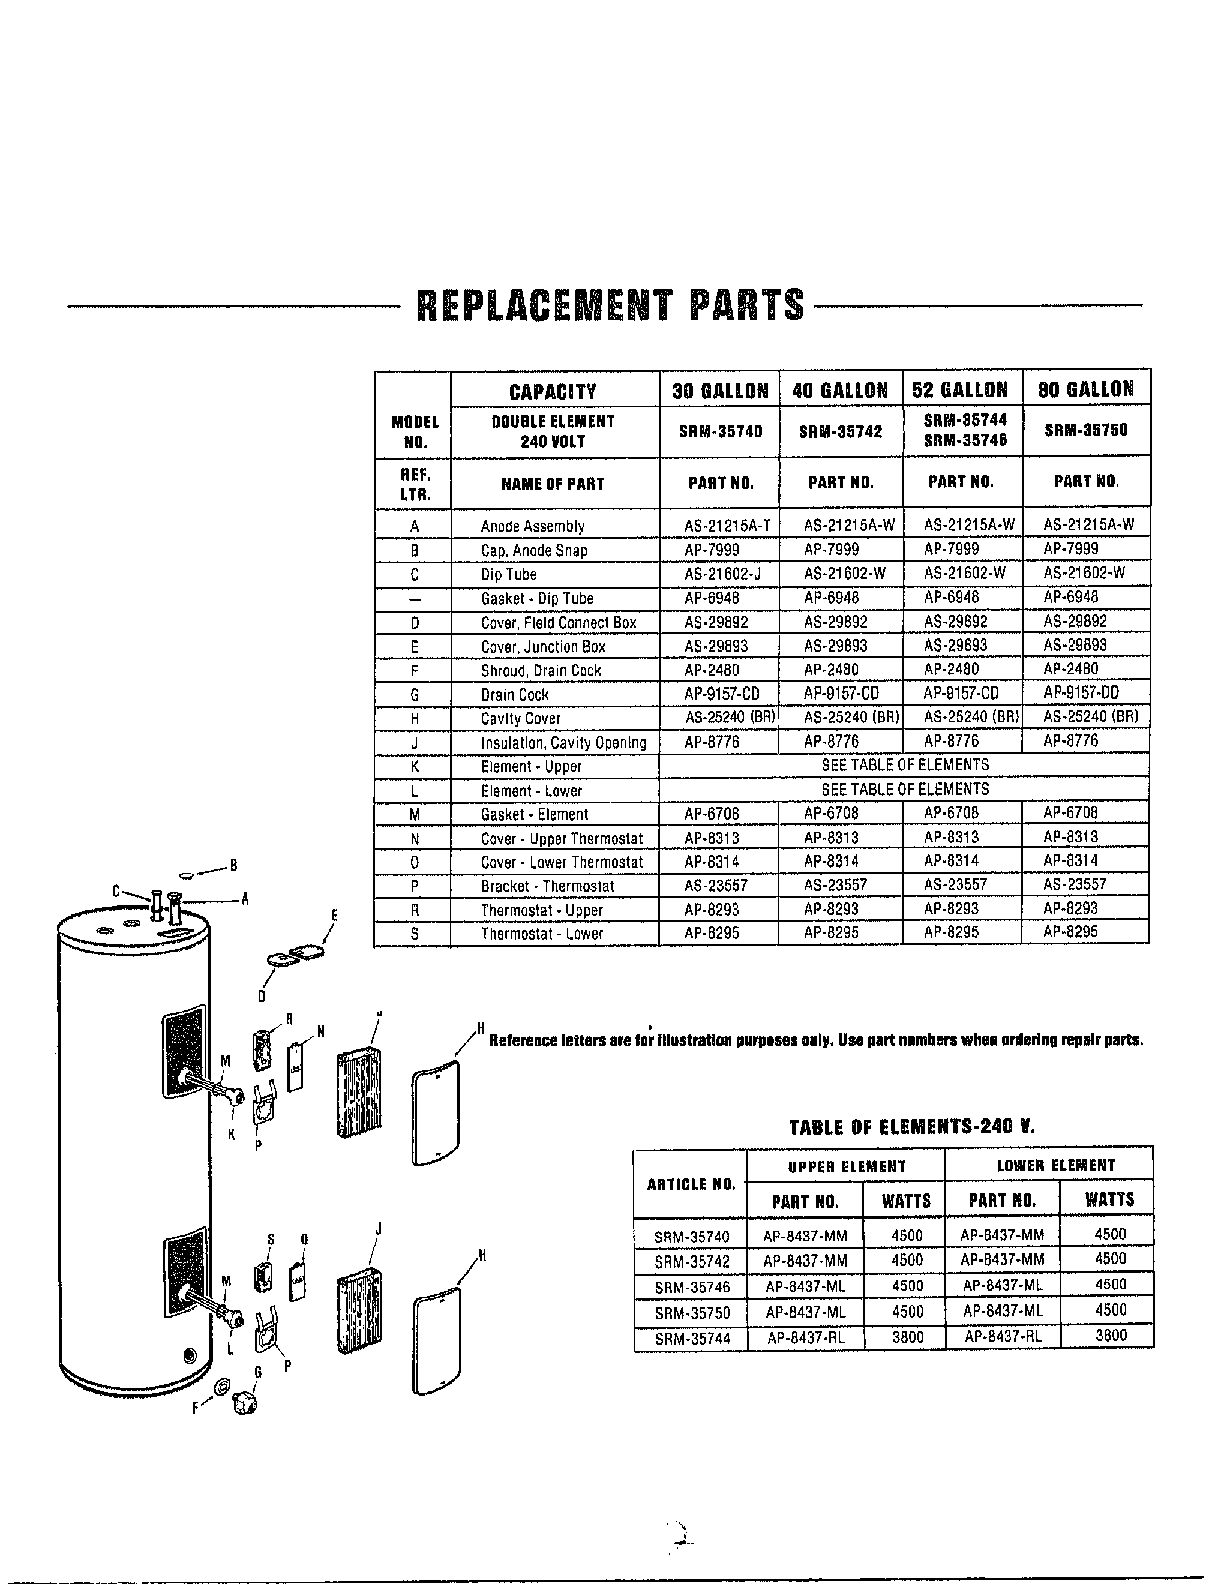 Wiring Diagram For Rheem Hot Water Heater from c.searspartsdirect.com